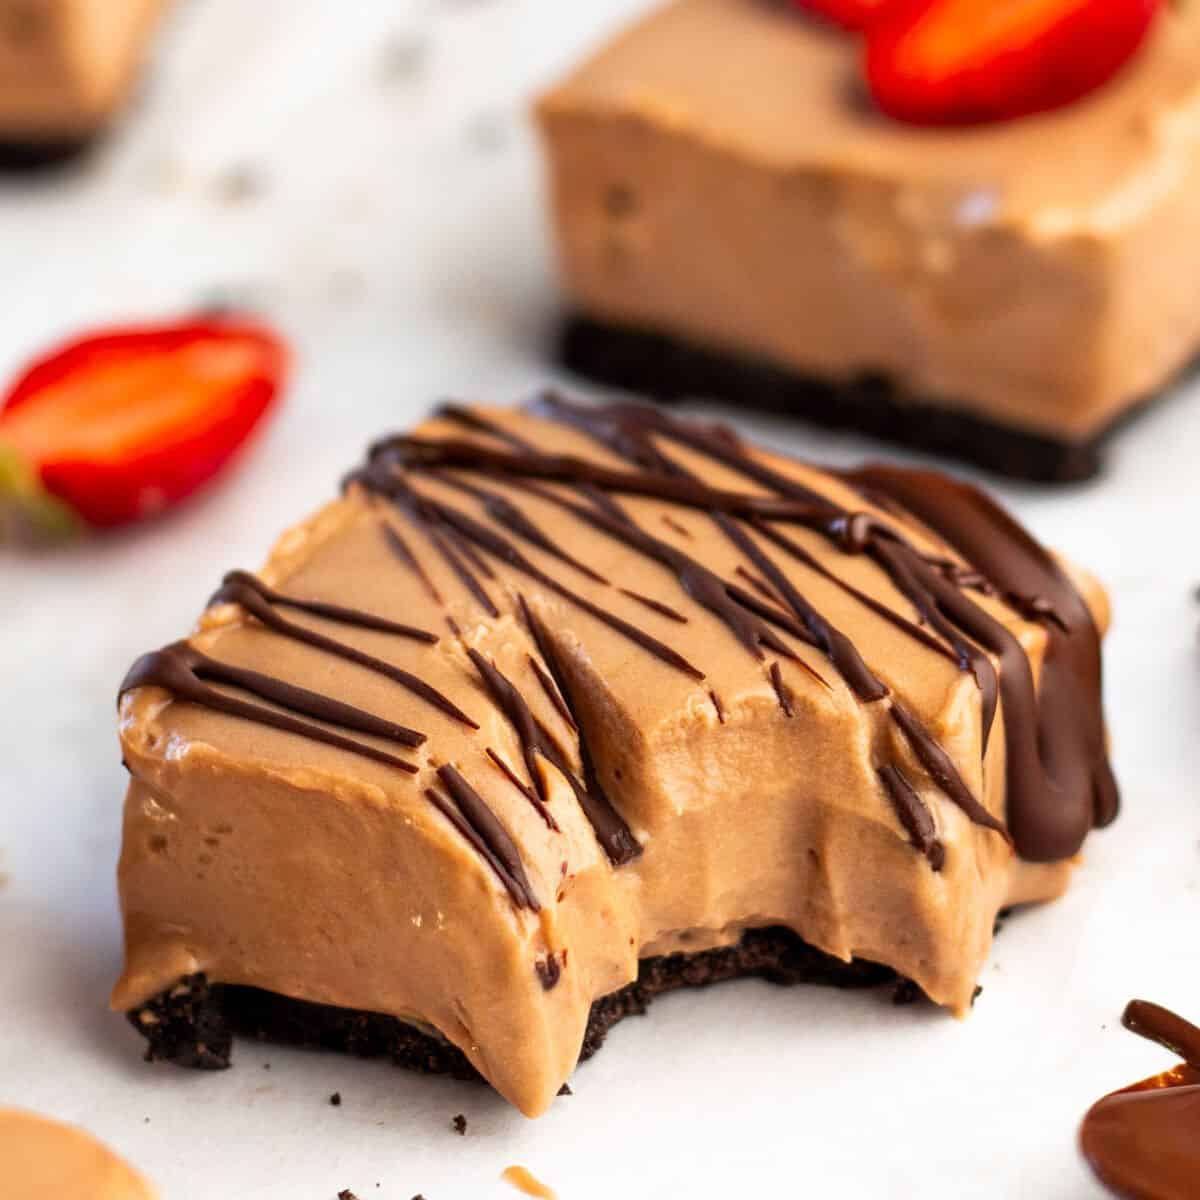 No Bake Sugar Free Chocolate Cheesecake Bars, an easy and delicious lush chocolate recipe made with no added sugar. Low Carb, Gluten Free.